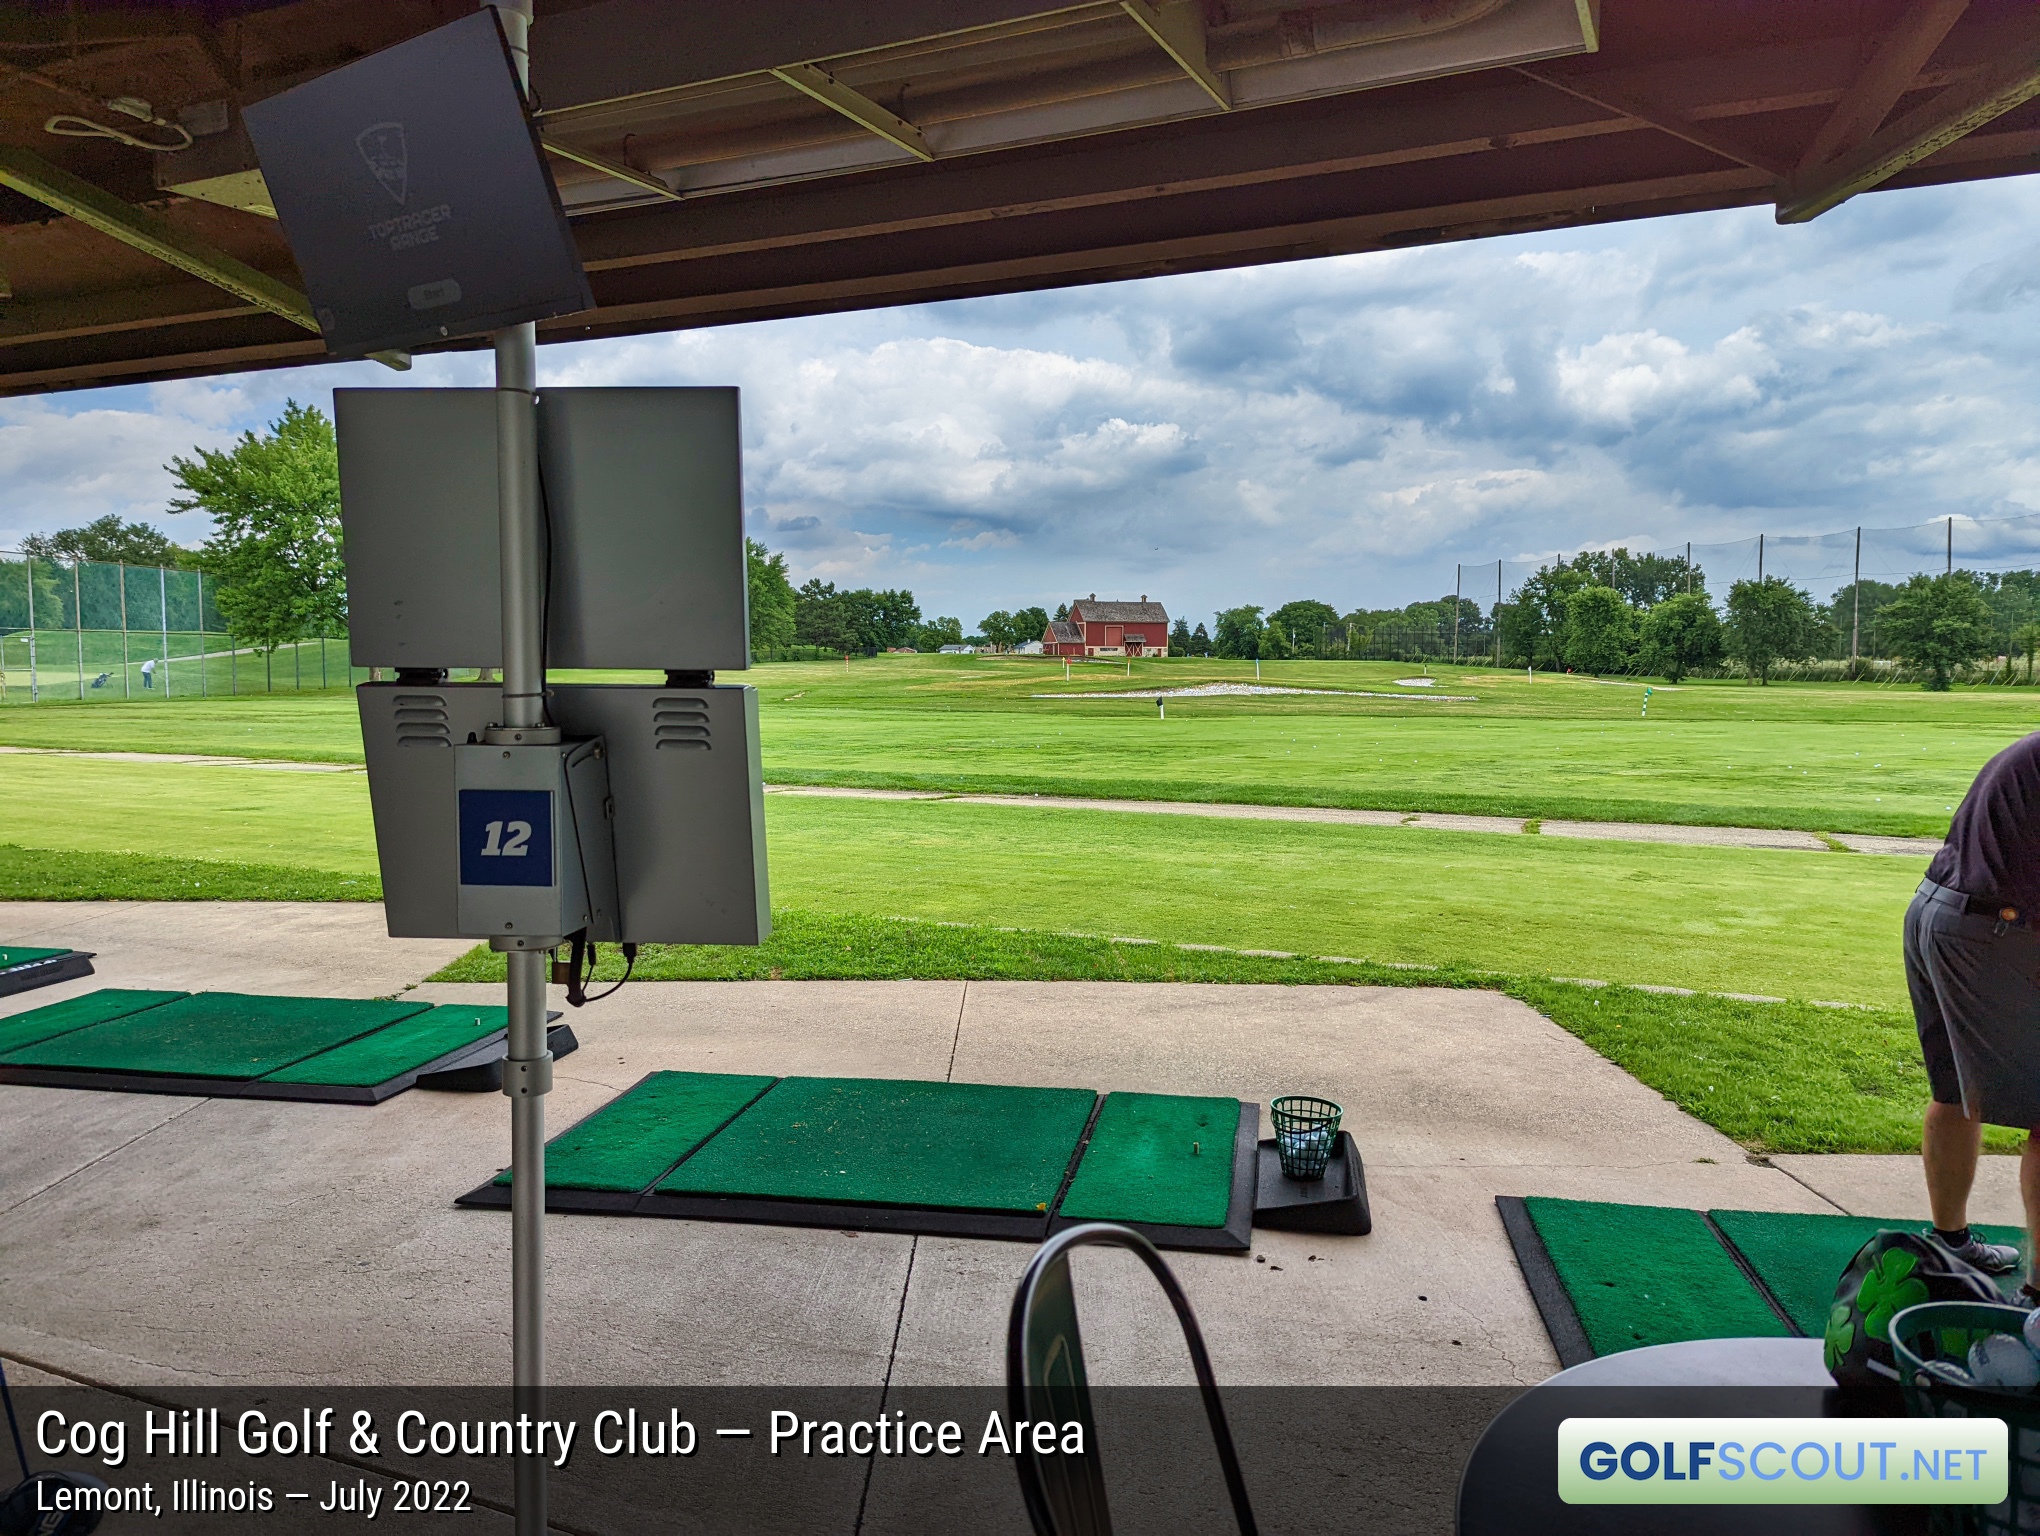 Photo of the practice area at Cog Hill Course #3 in Lemont, Illinois. The mats at the Cog Hill driving range.